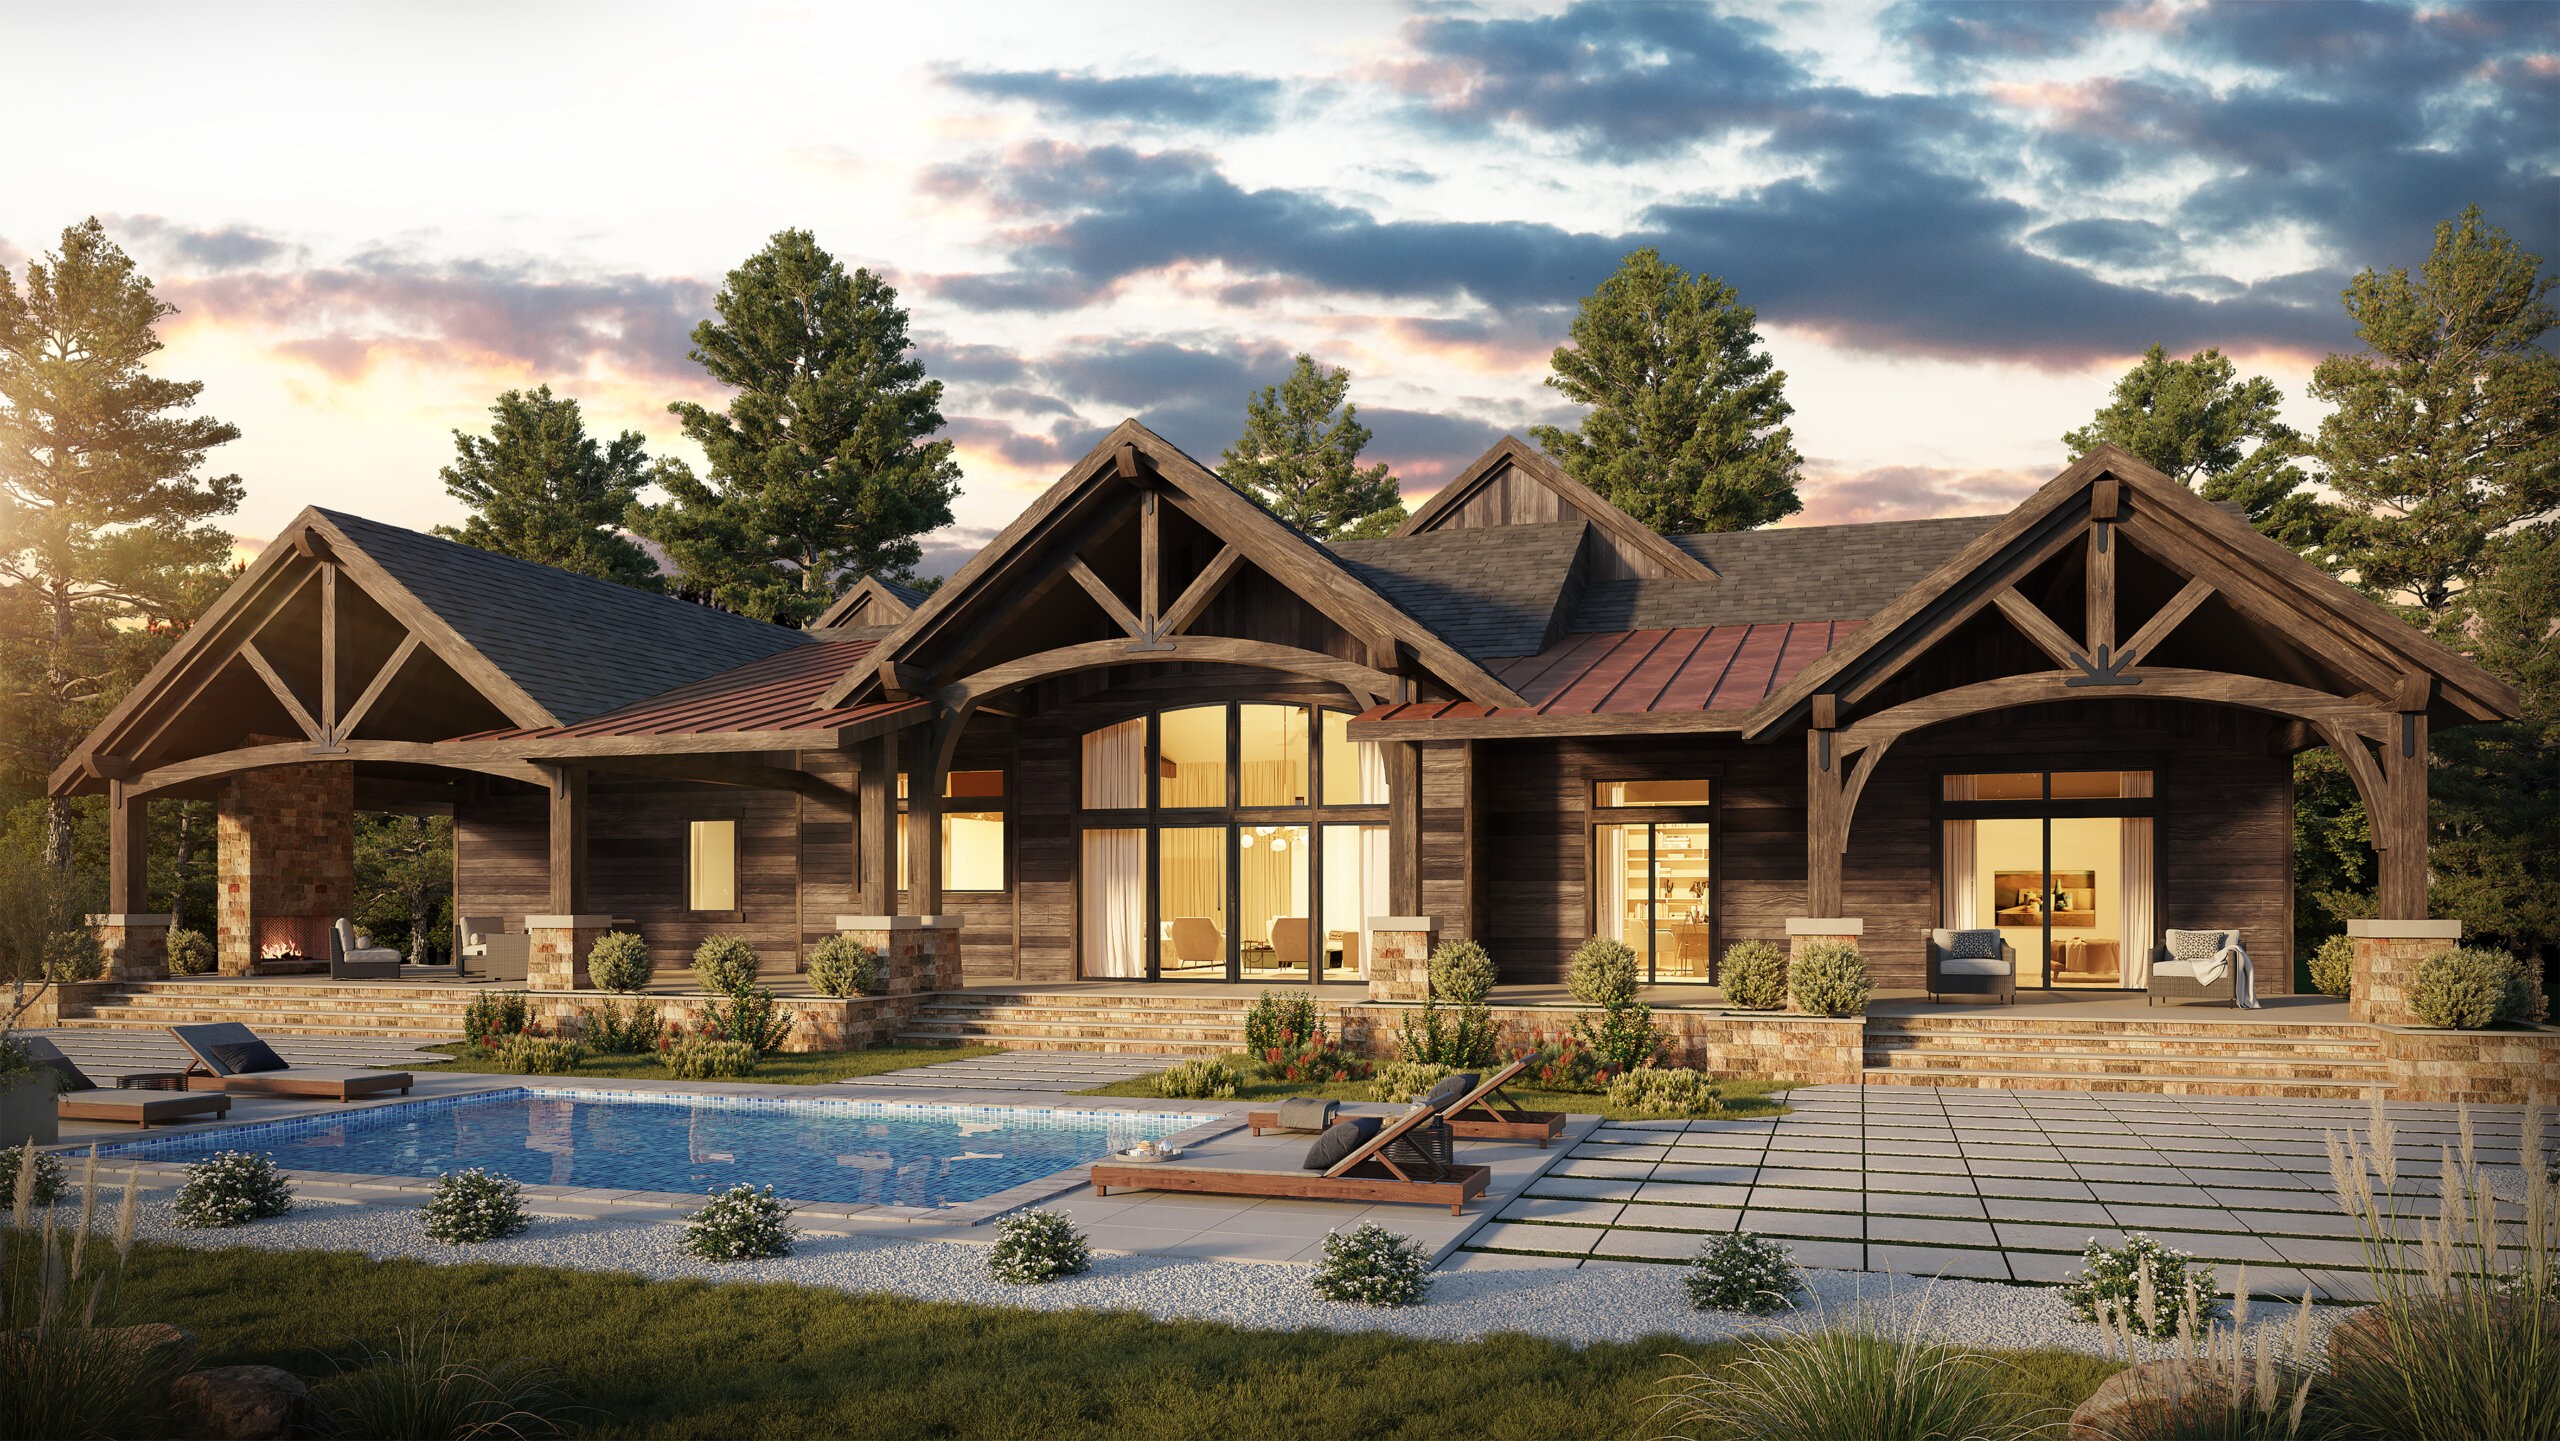 https://markstewart.com/wp-content/uploads/2021/11/Rustic-Lodge-House-Plan-MB-3809-Noel-Rear-View-scaled.jpg